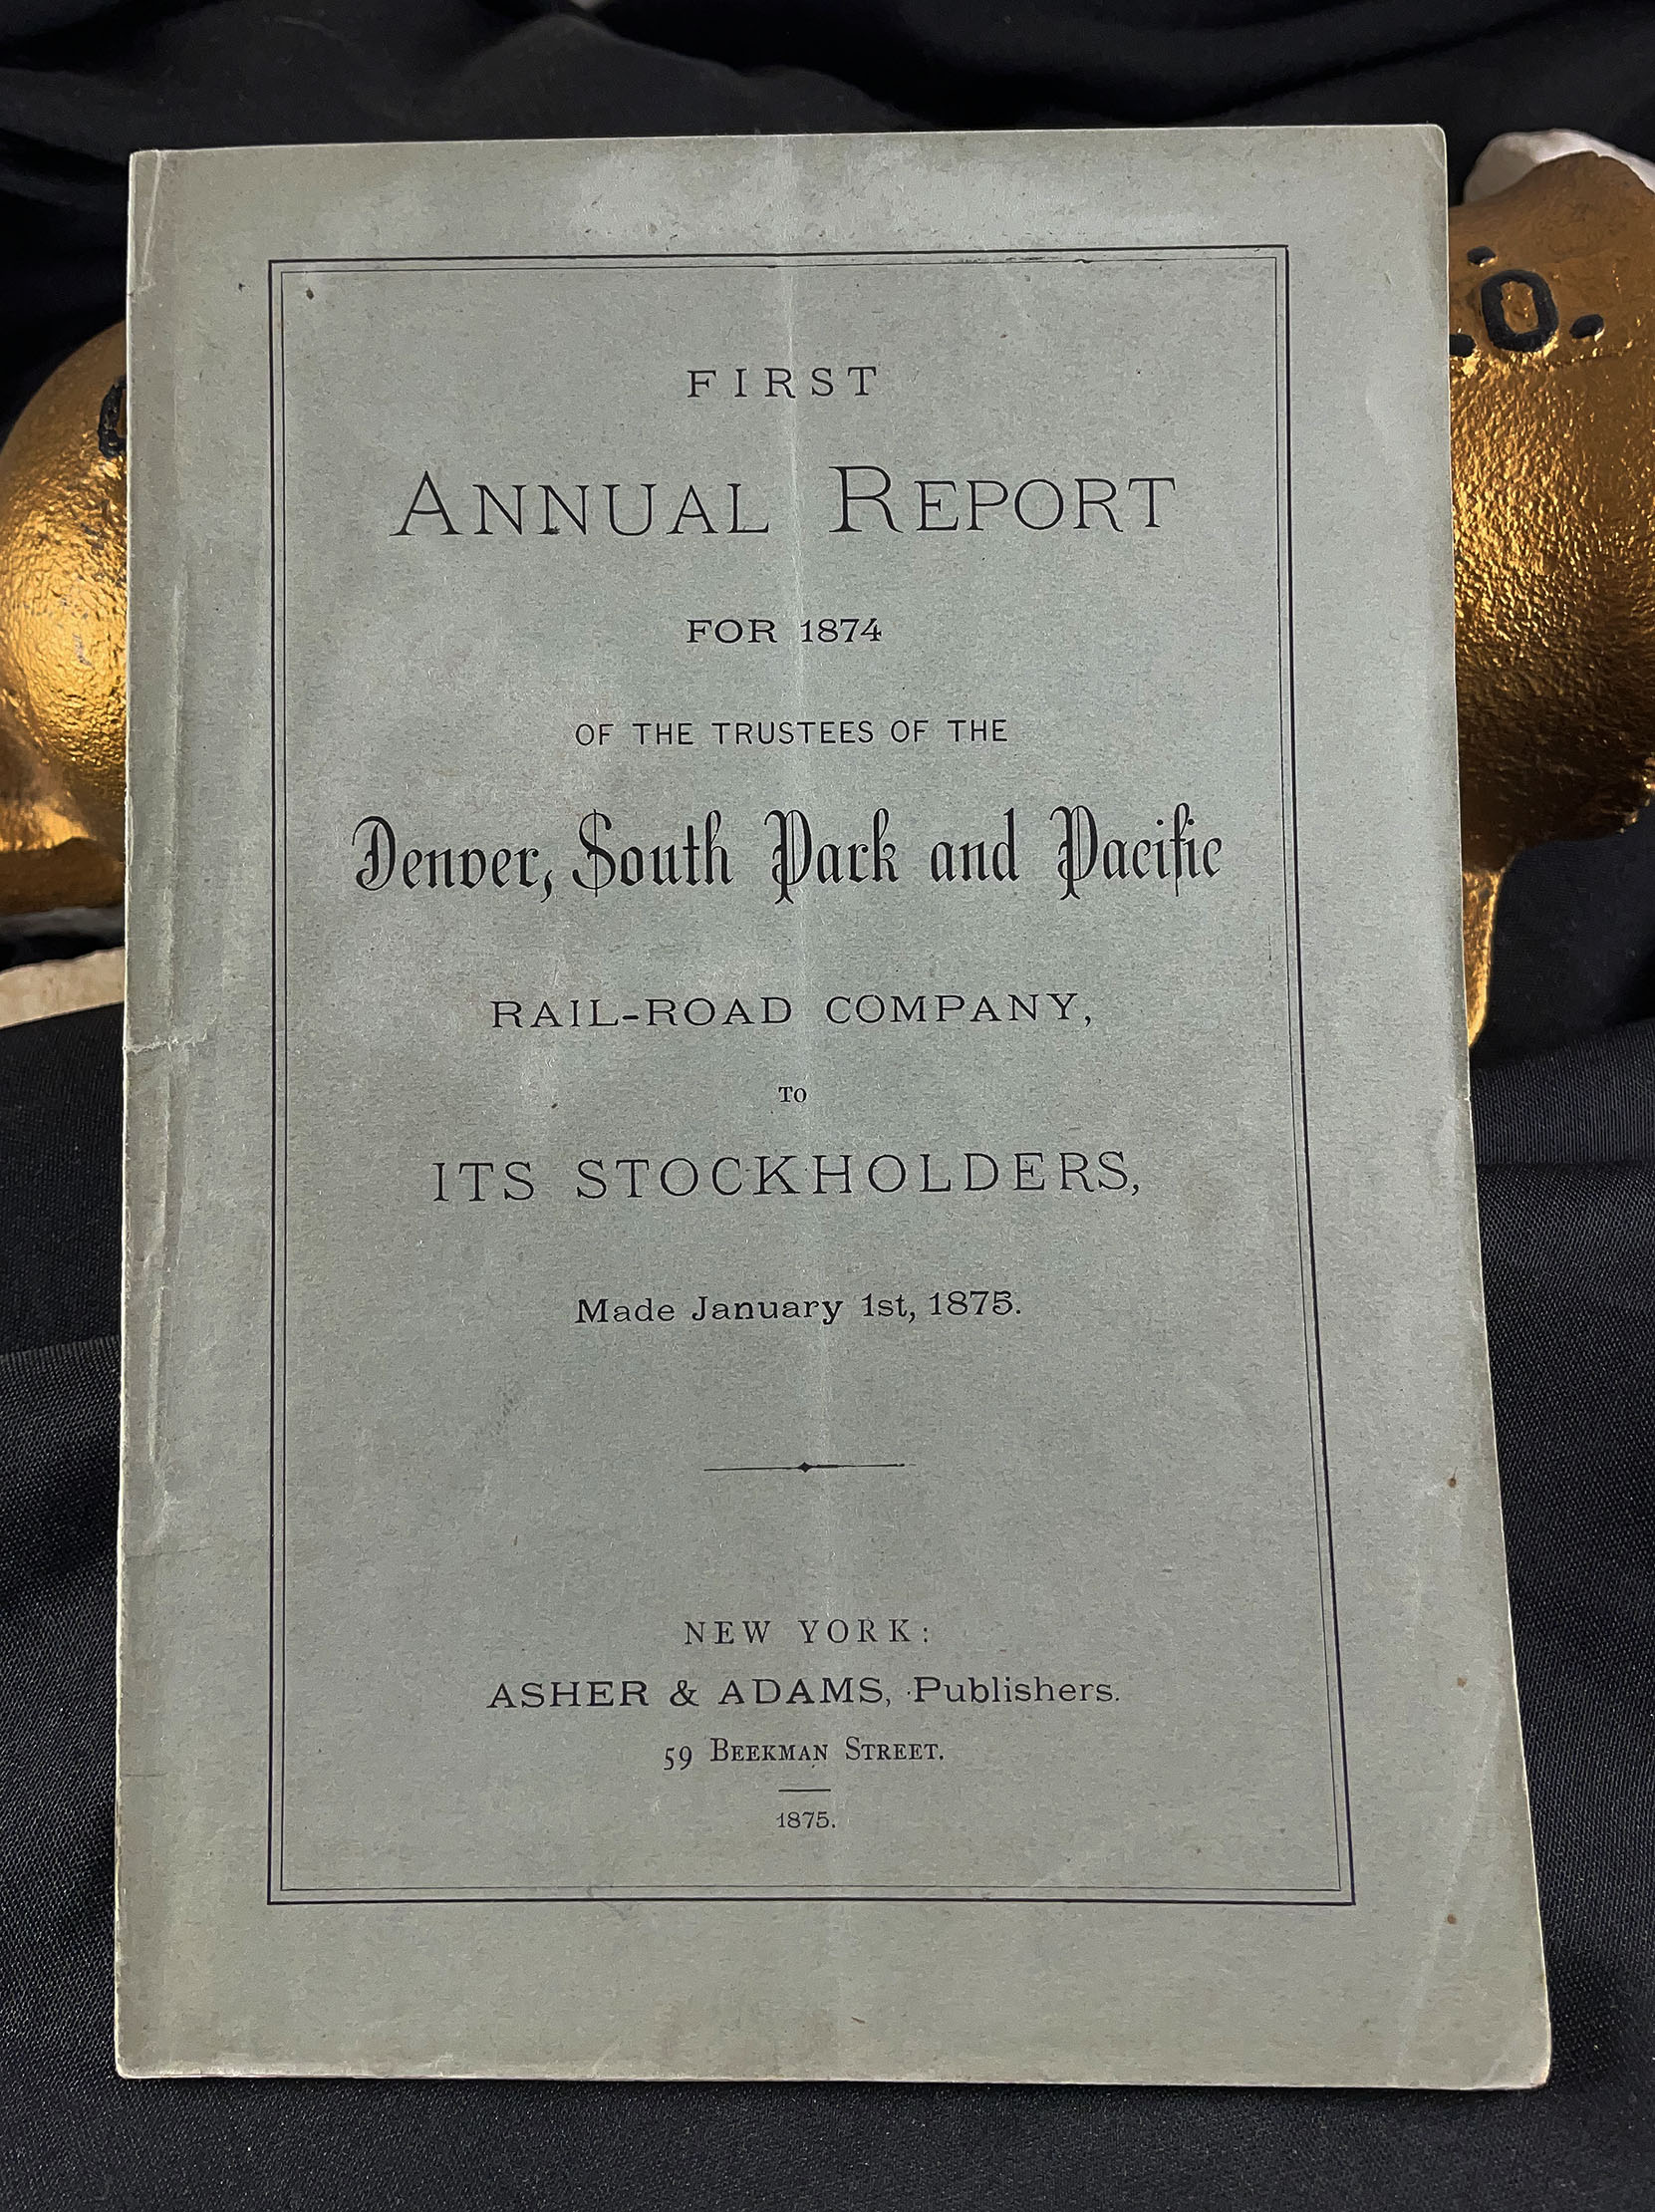 DENVER SOUTH PARK & PACIFIC RAILROAD FIRST ANNUAL REPORT 1874